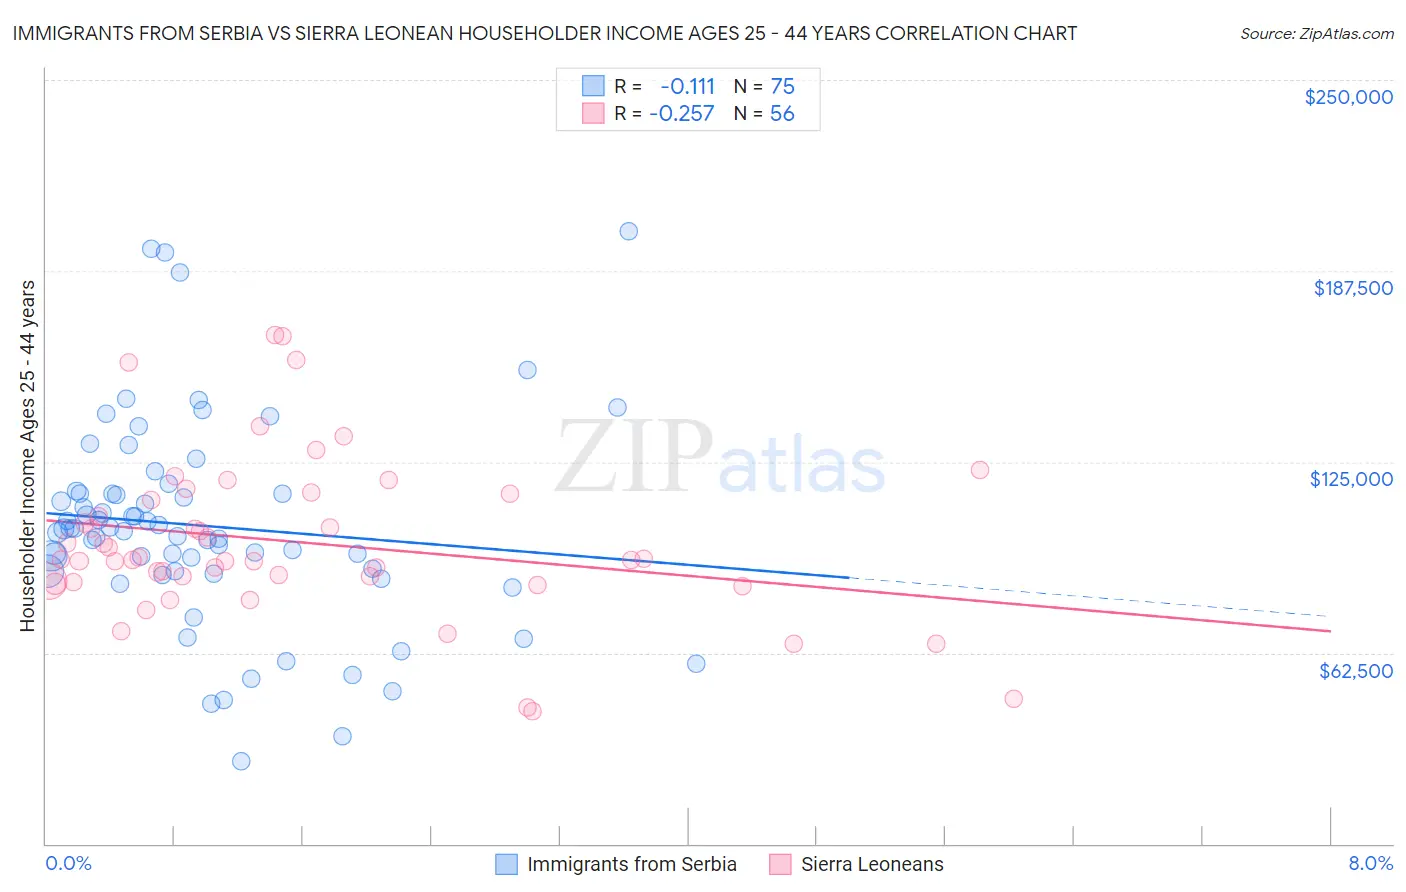 Immigrants from Serbia vs Sierra Leonean Householder Income Ages 25 - 44 years